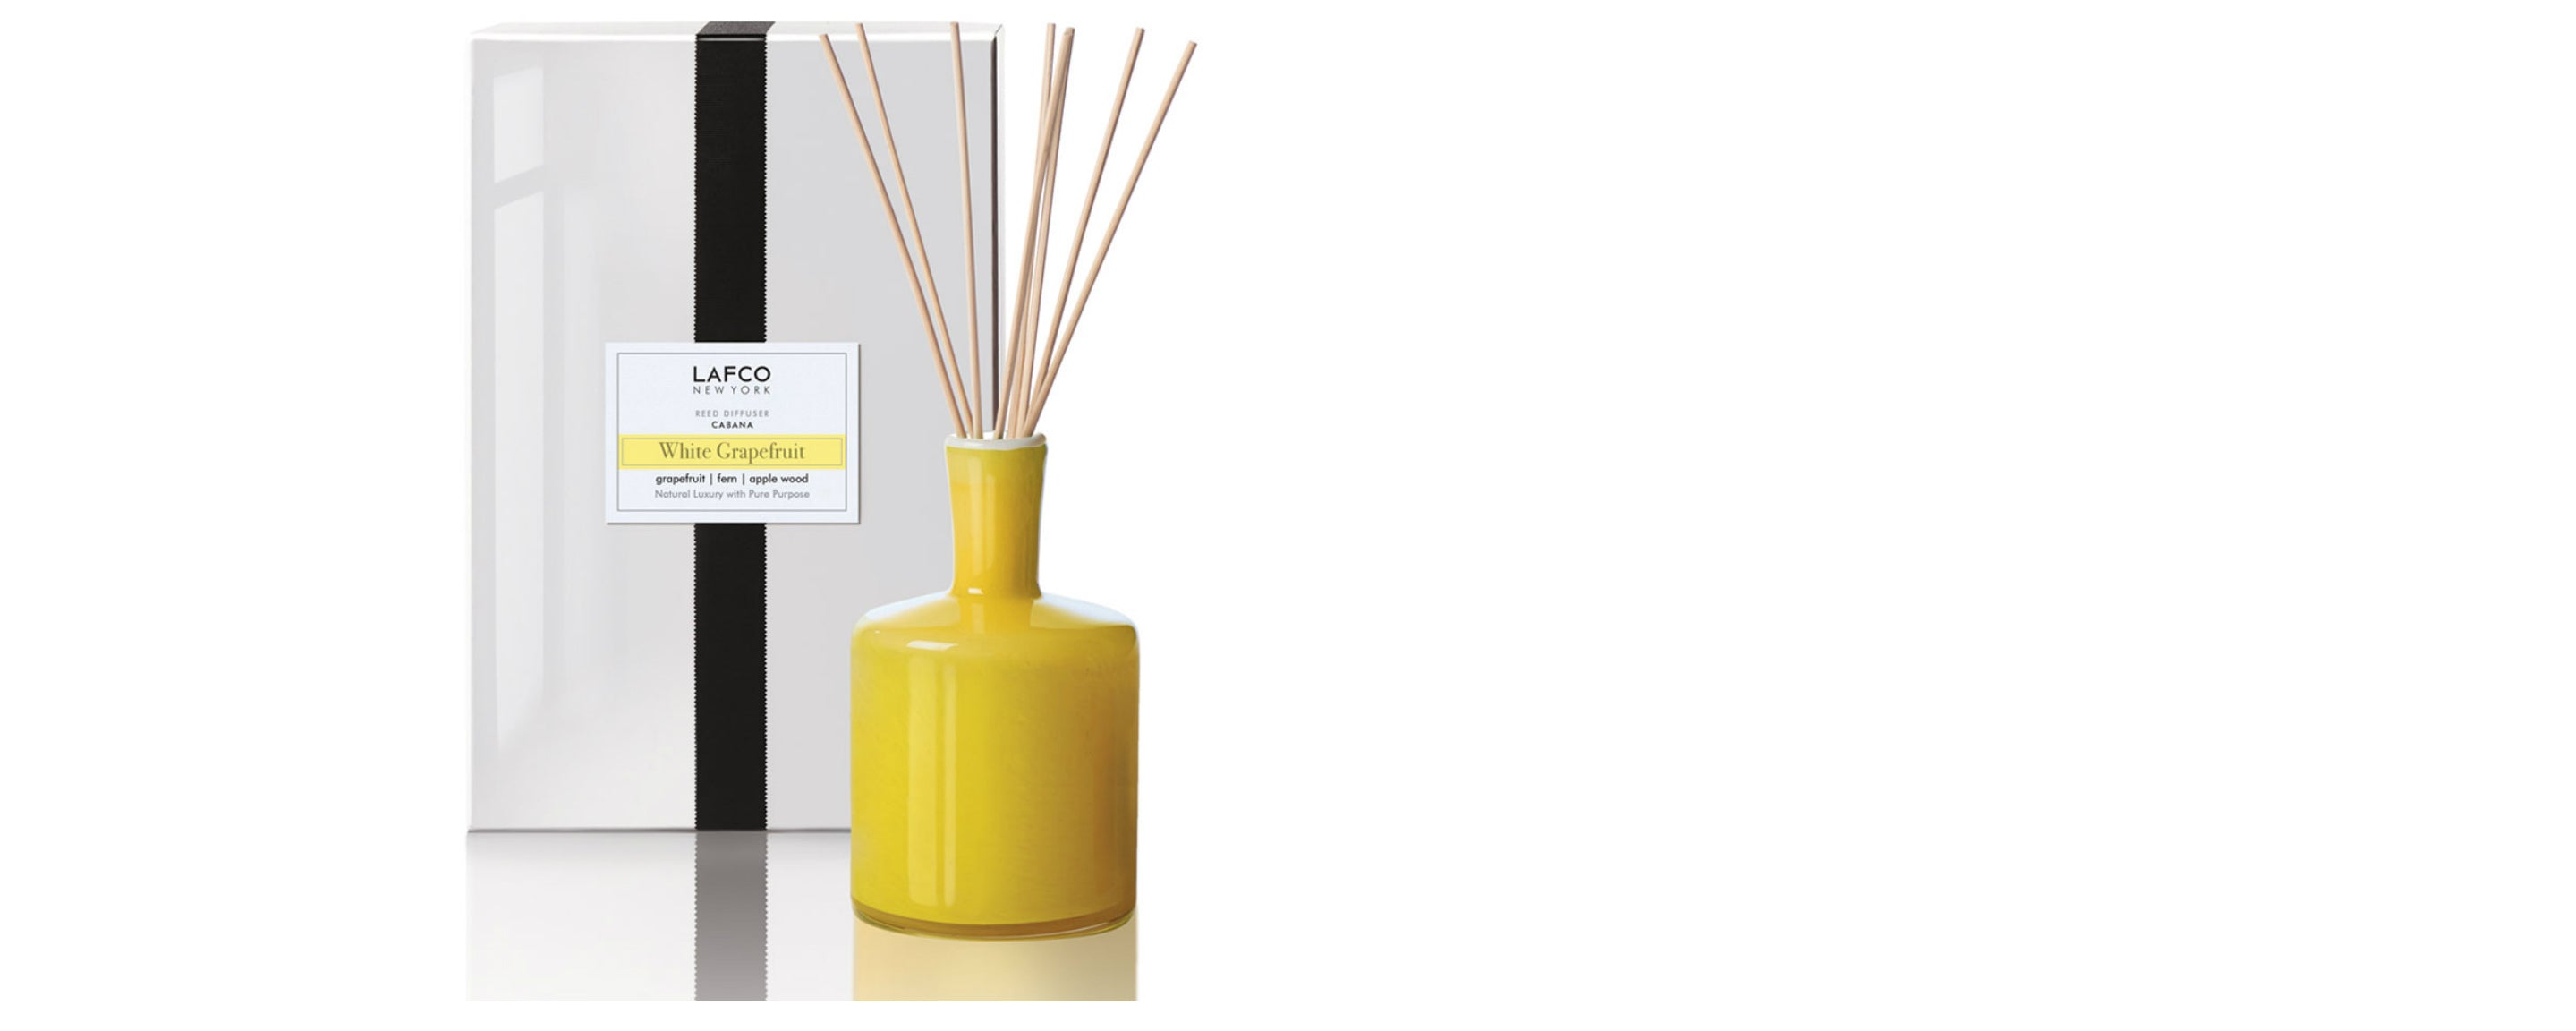 white grapefruit cabana diffuser by lafco new york